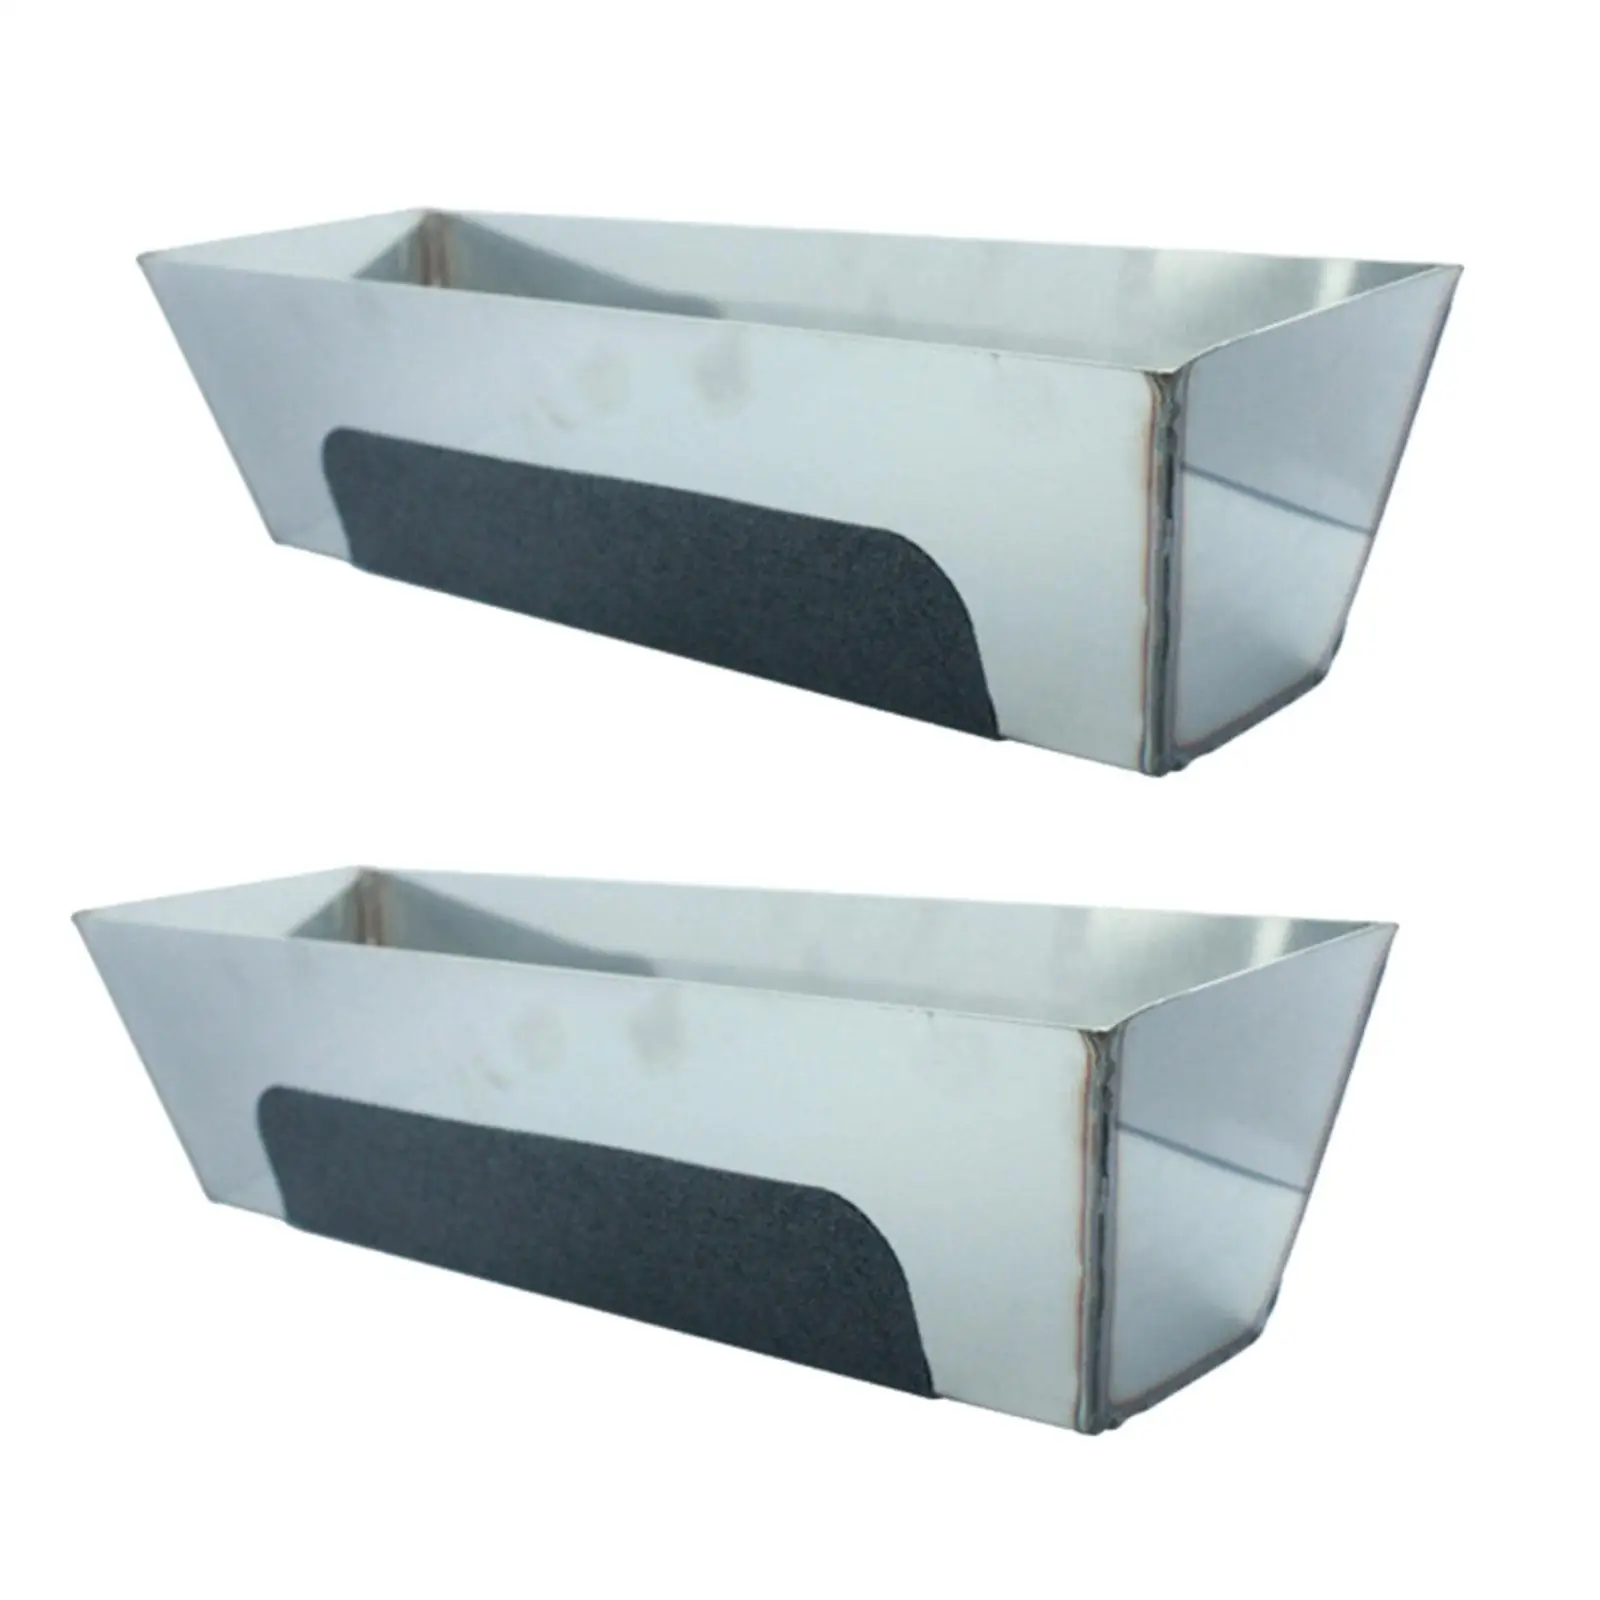 Stainless Steel Mud Pan Accessories Sheared Edges Lightweight with Reinforced Band Sturdy Metal Bucket Plastering Plasterers